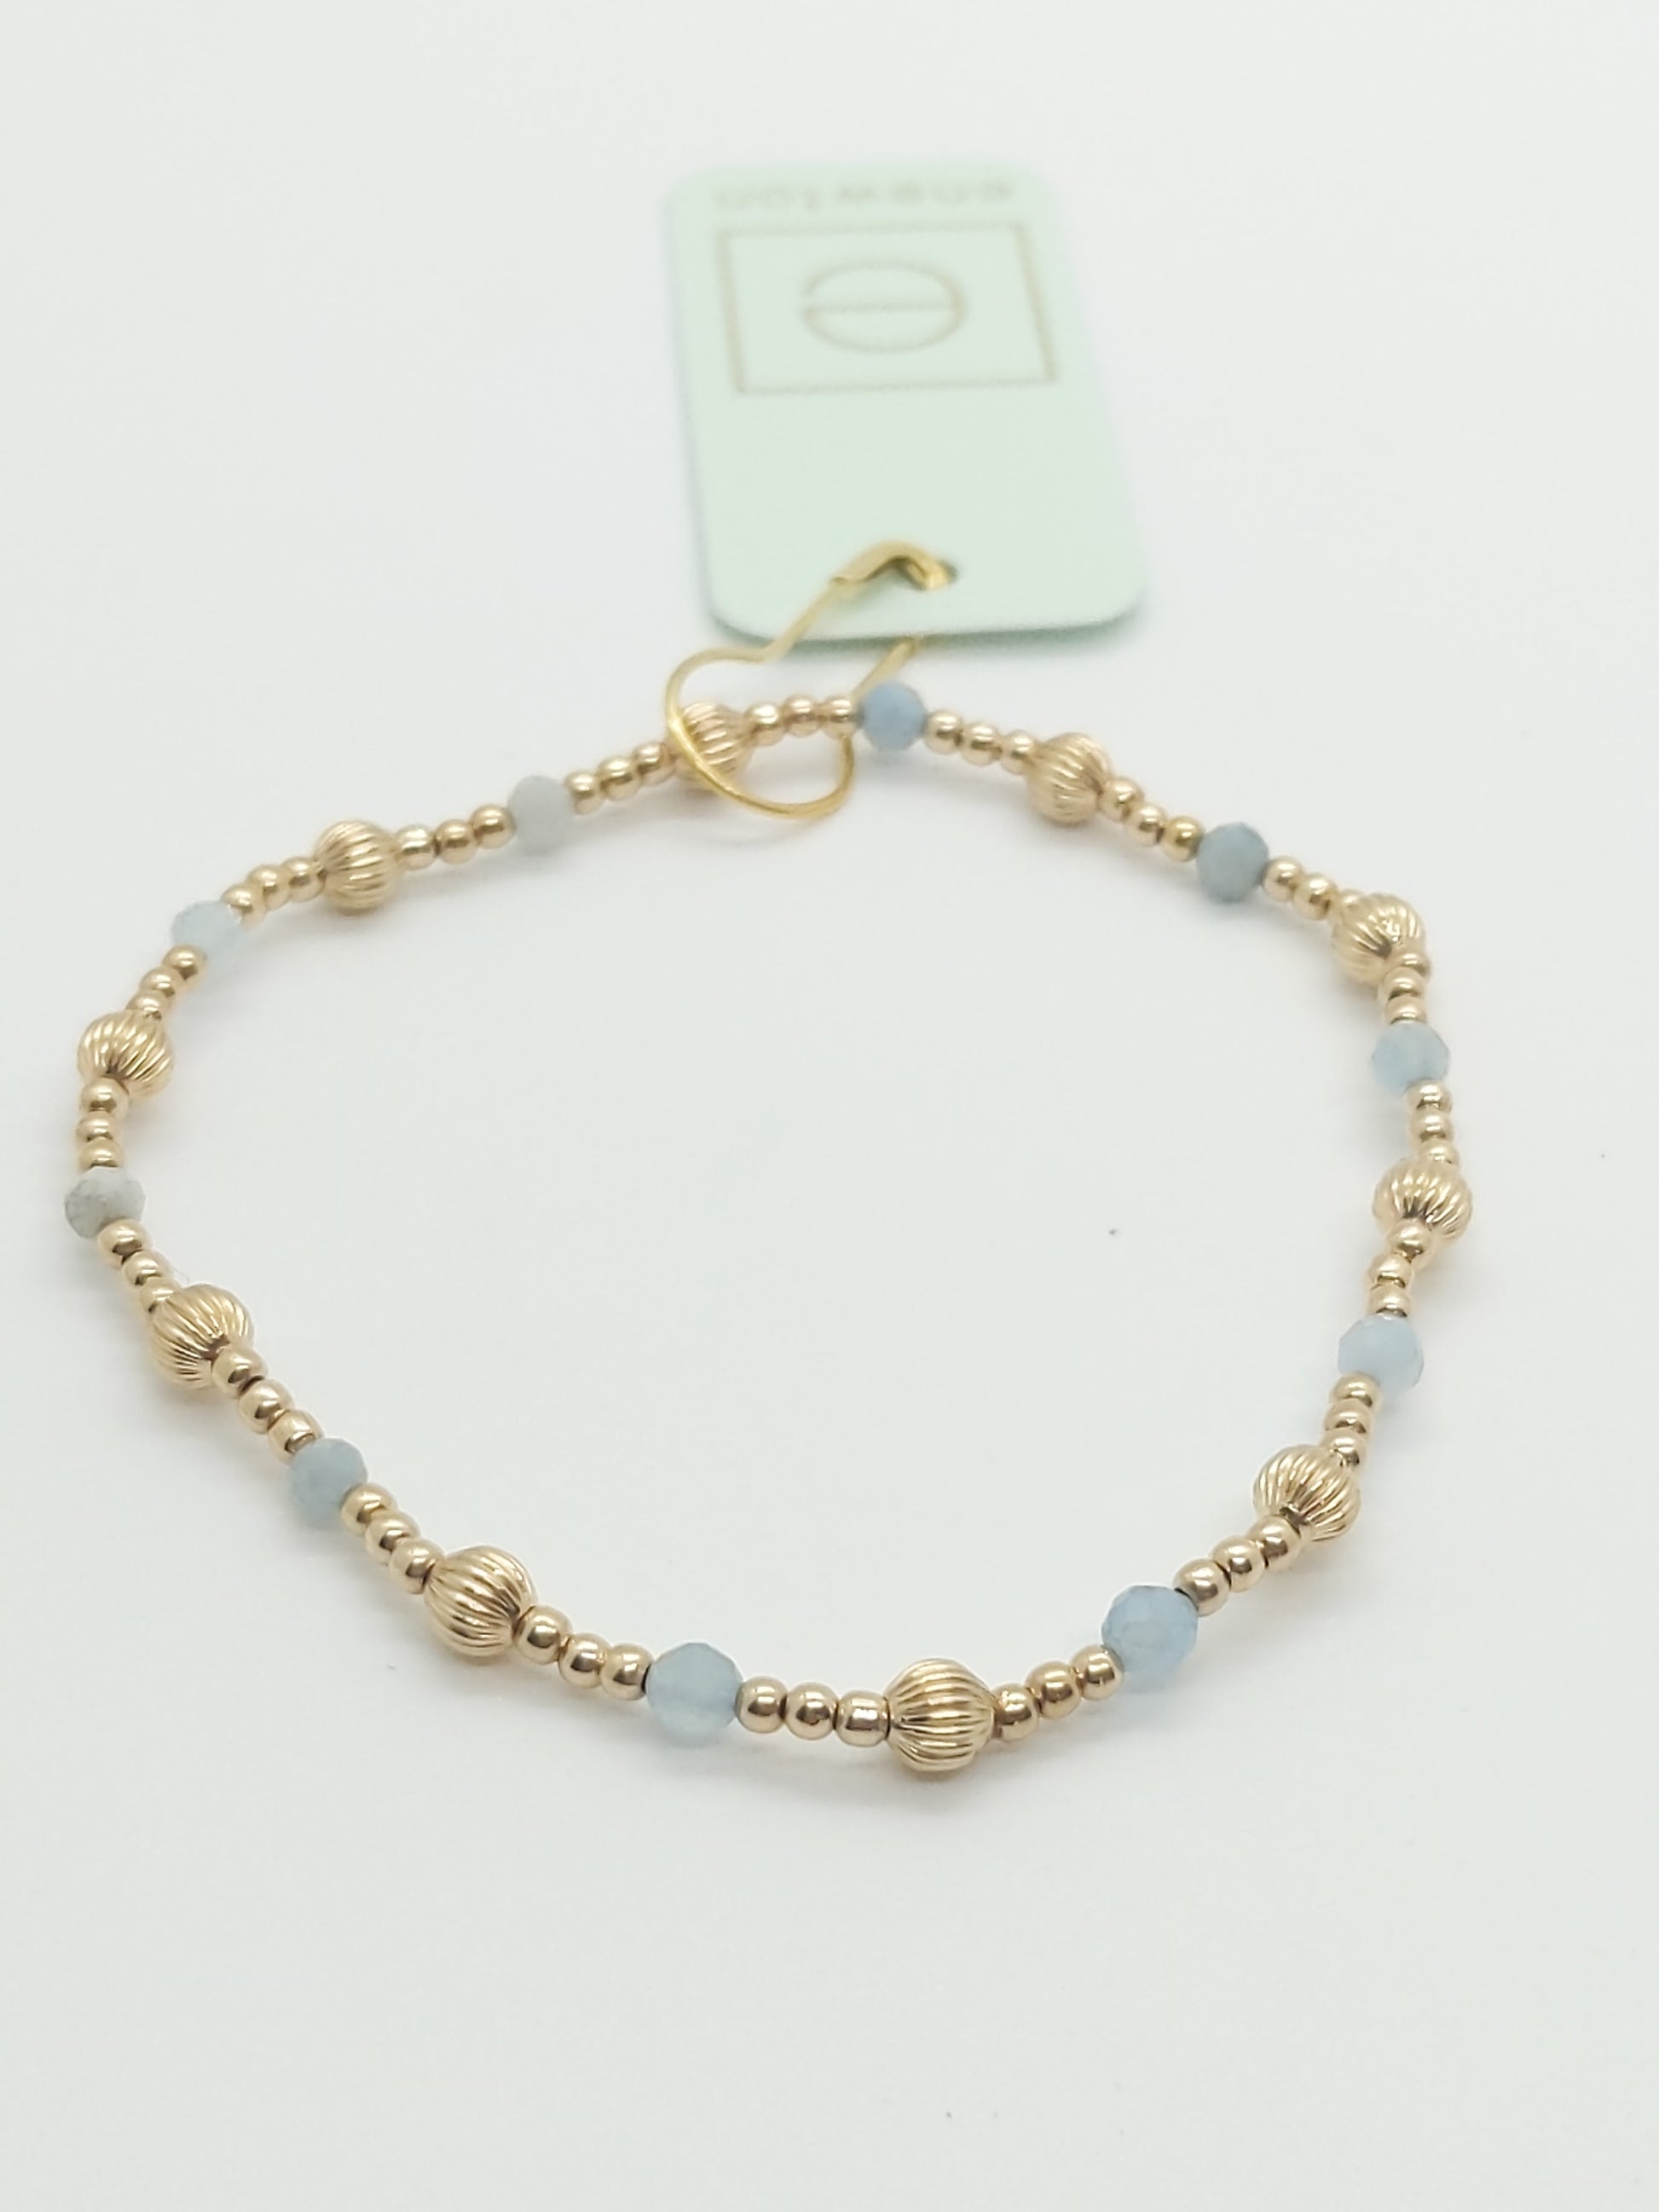 Made with a mix of 2mm, 14kt gold-filled beads, 4mm dignity 14kt gold-filled beads, and 3mm Aquamarine gemstones.